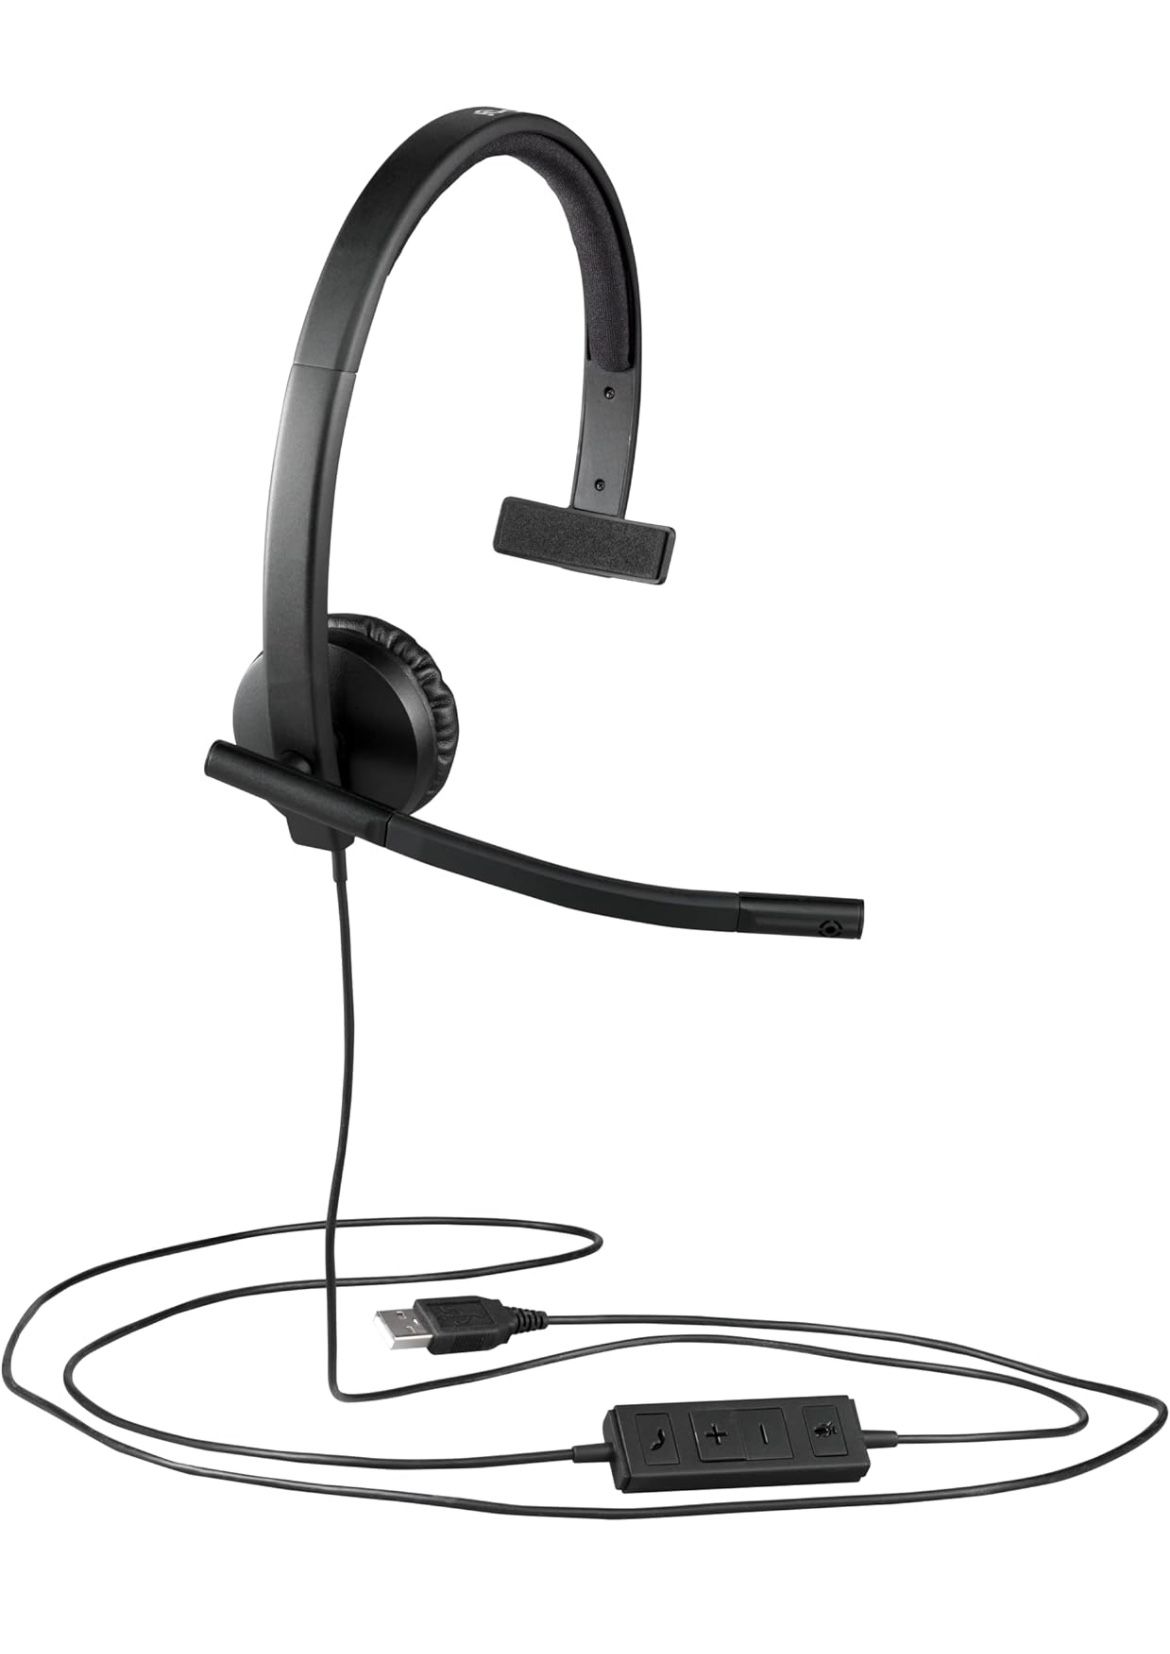 Logitech H570e Wired Headset | Mono Headphones with Noise-Cancelling Microphone | USB | In-Line Controls with Mute Button | Indicator LED | PC/Mac/Lap